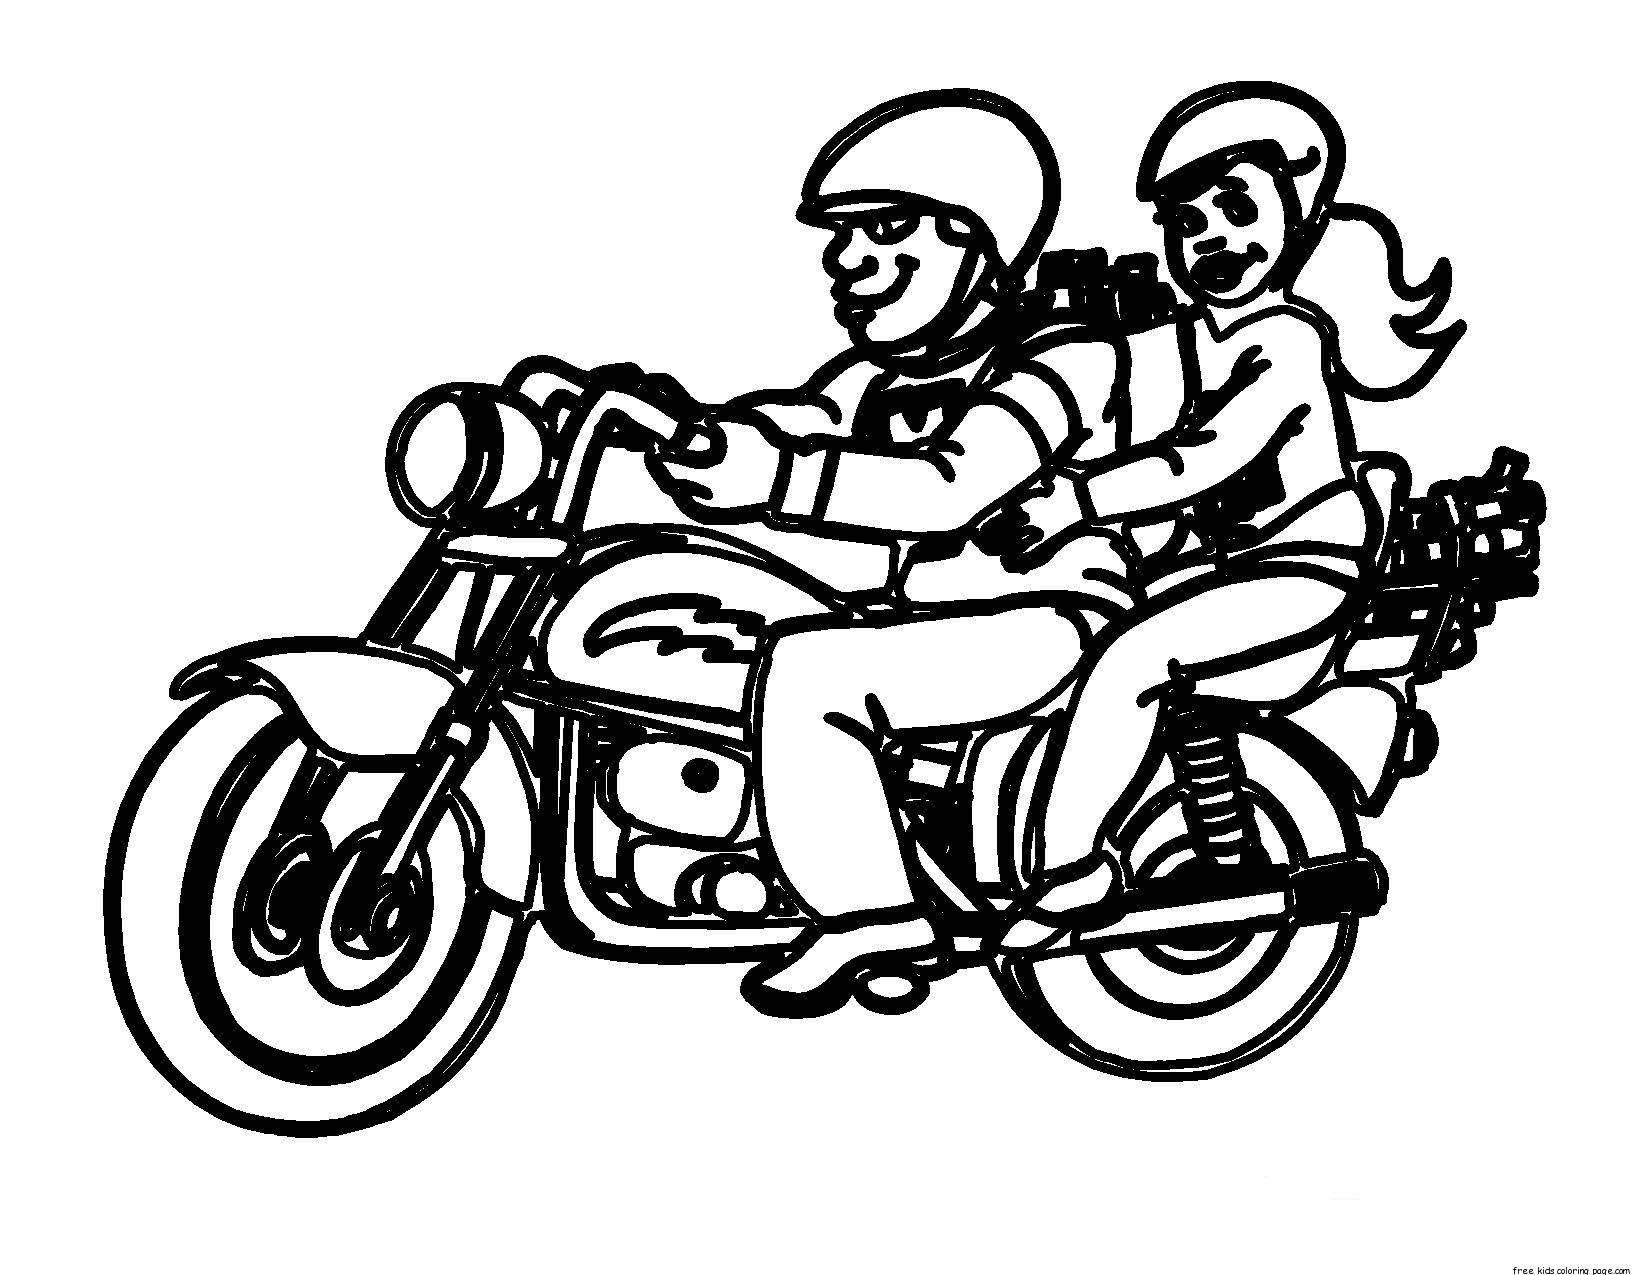 Printable motorcycle rules in california coloring pagesFree Printable